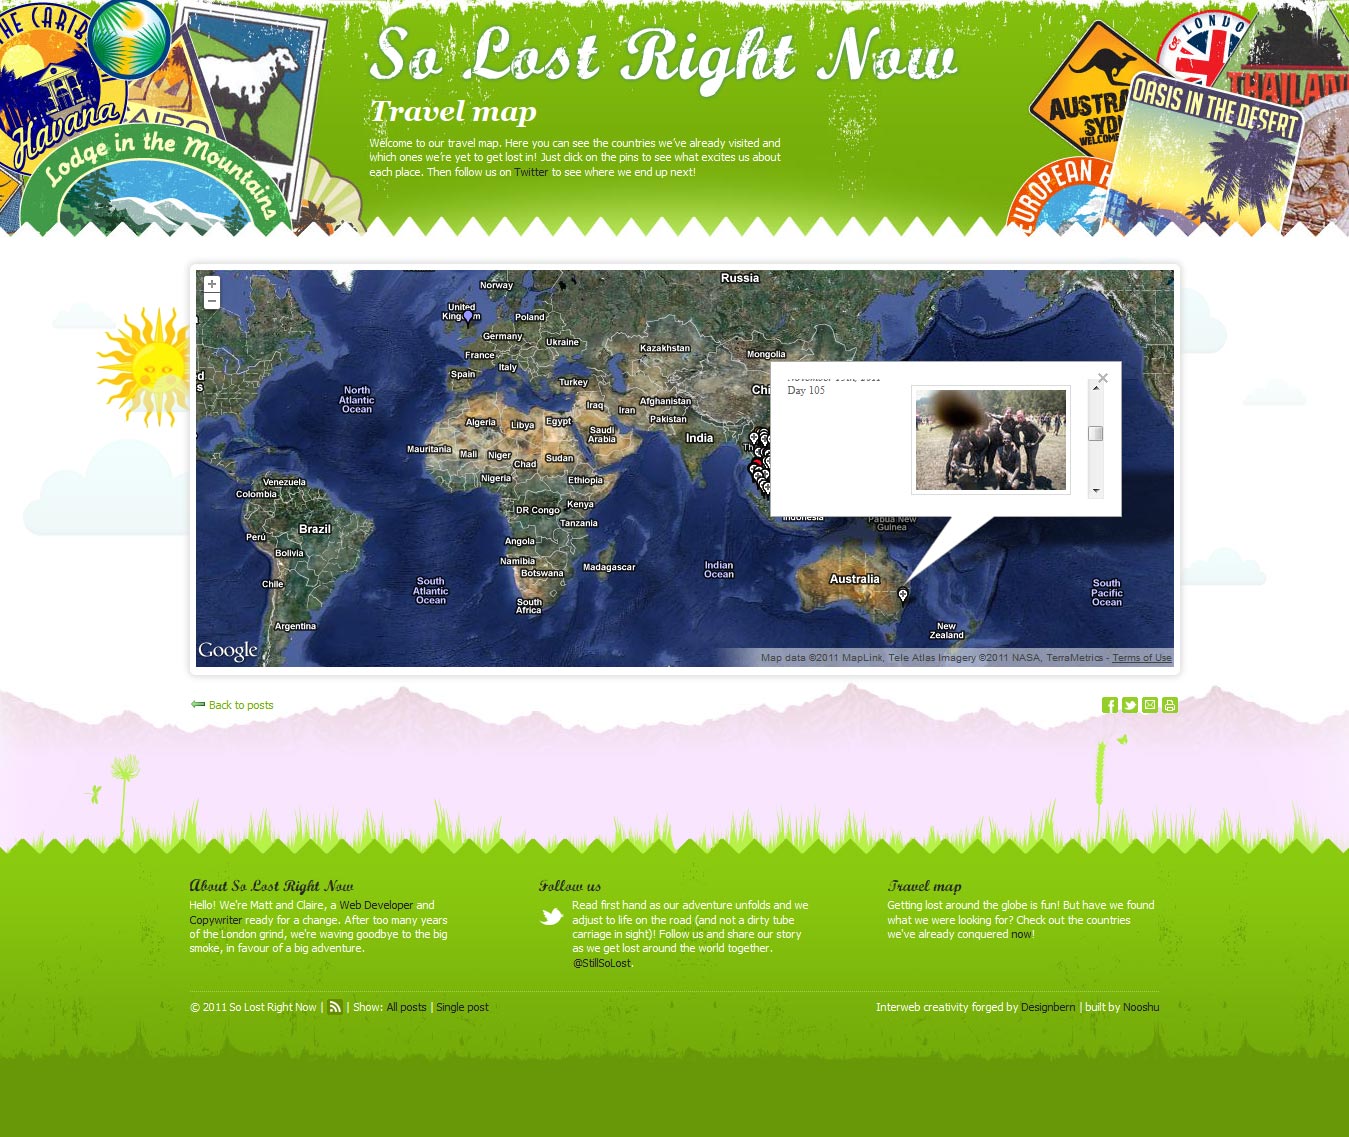 So Lost Right Now map page.